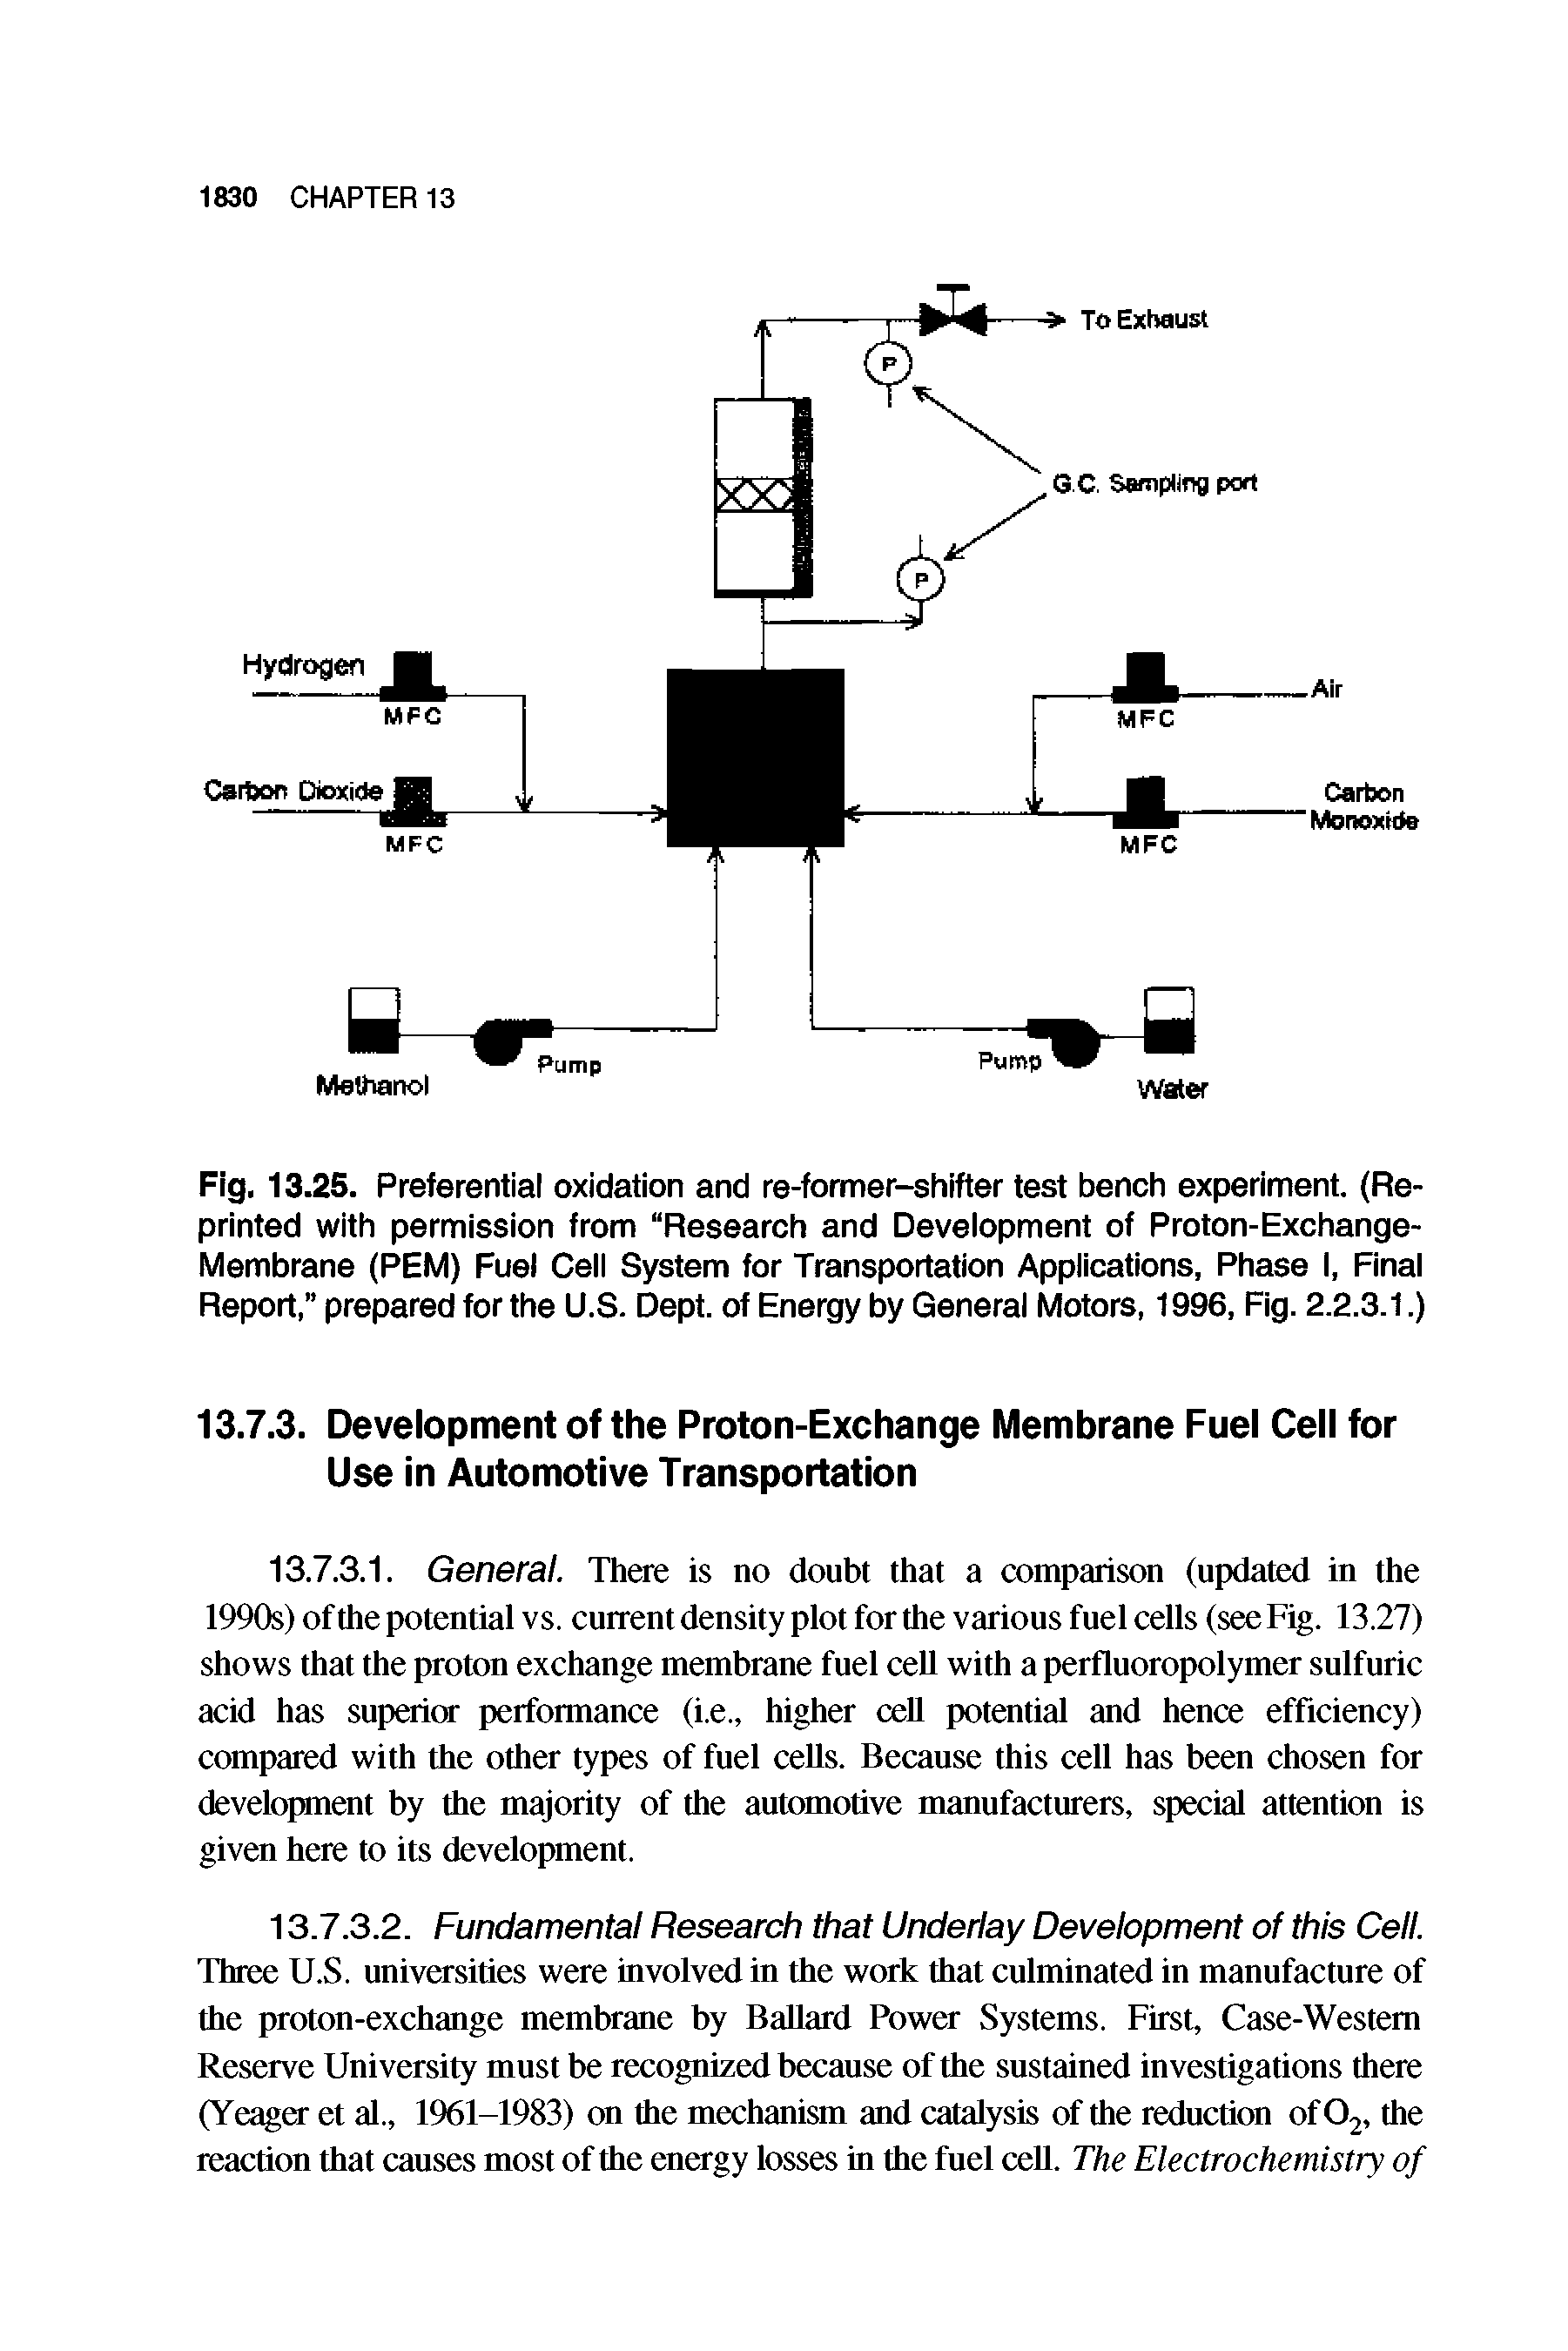 Fig. 13.25. Preferential oxidation and re-former-shifter test bench experiment. (Reprinted with permission from Research and Development of Proton-Exchange-Membrane (PEM) Fuel Cell System for Transportation Applications, Phase I, Final Report, prepared for the U.S. Dept, of Energy by General Motors, 1996, Fig. 2.2.3.1.)...